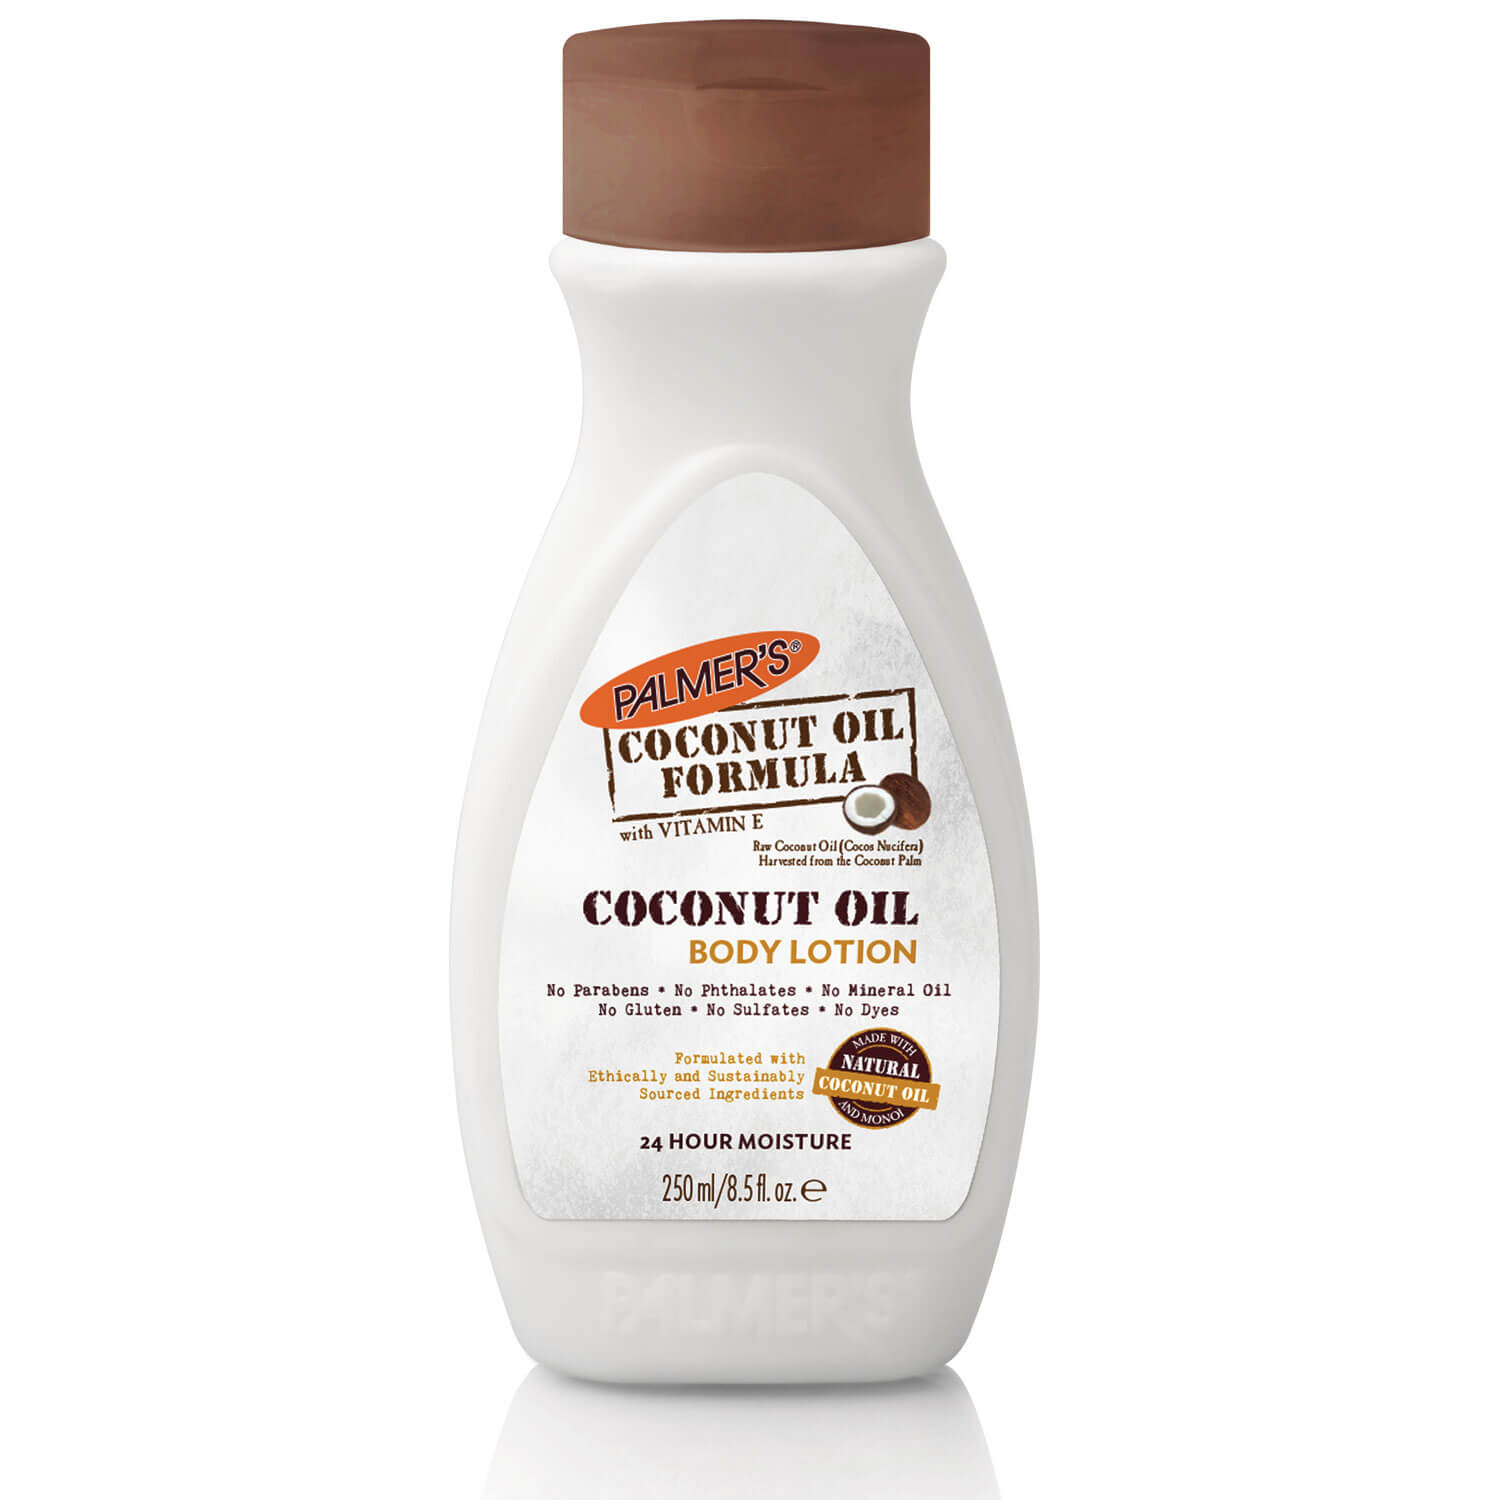 Palmers Palmers Coconut Oil Body Lotion 250ml 1 Shaws Department Stores